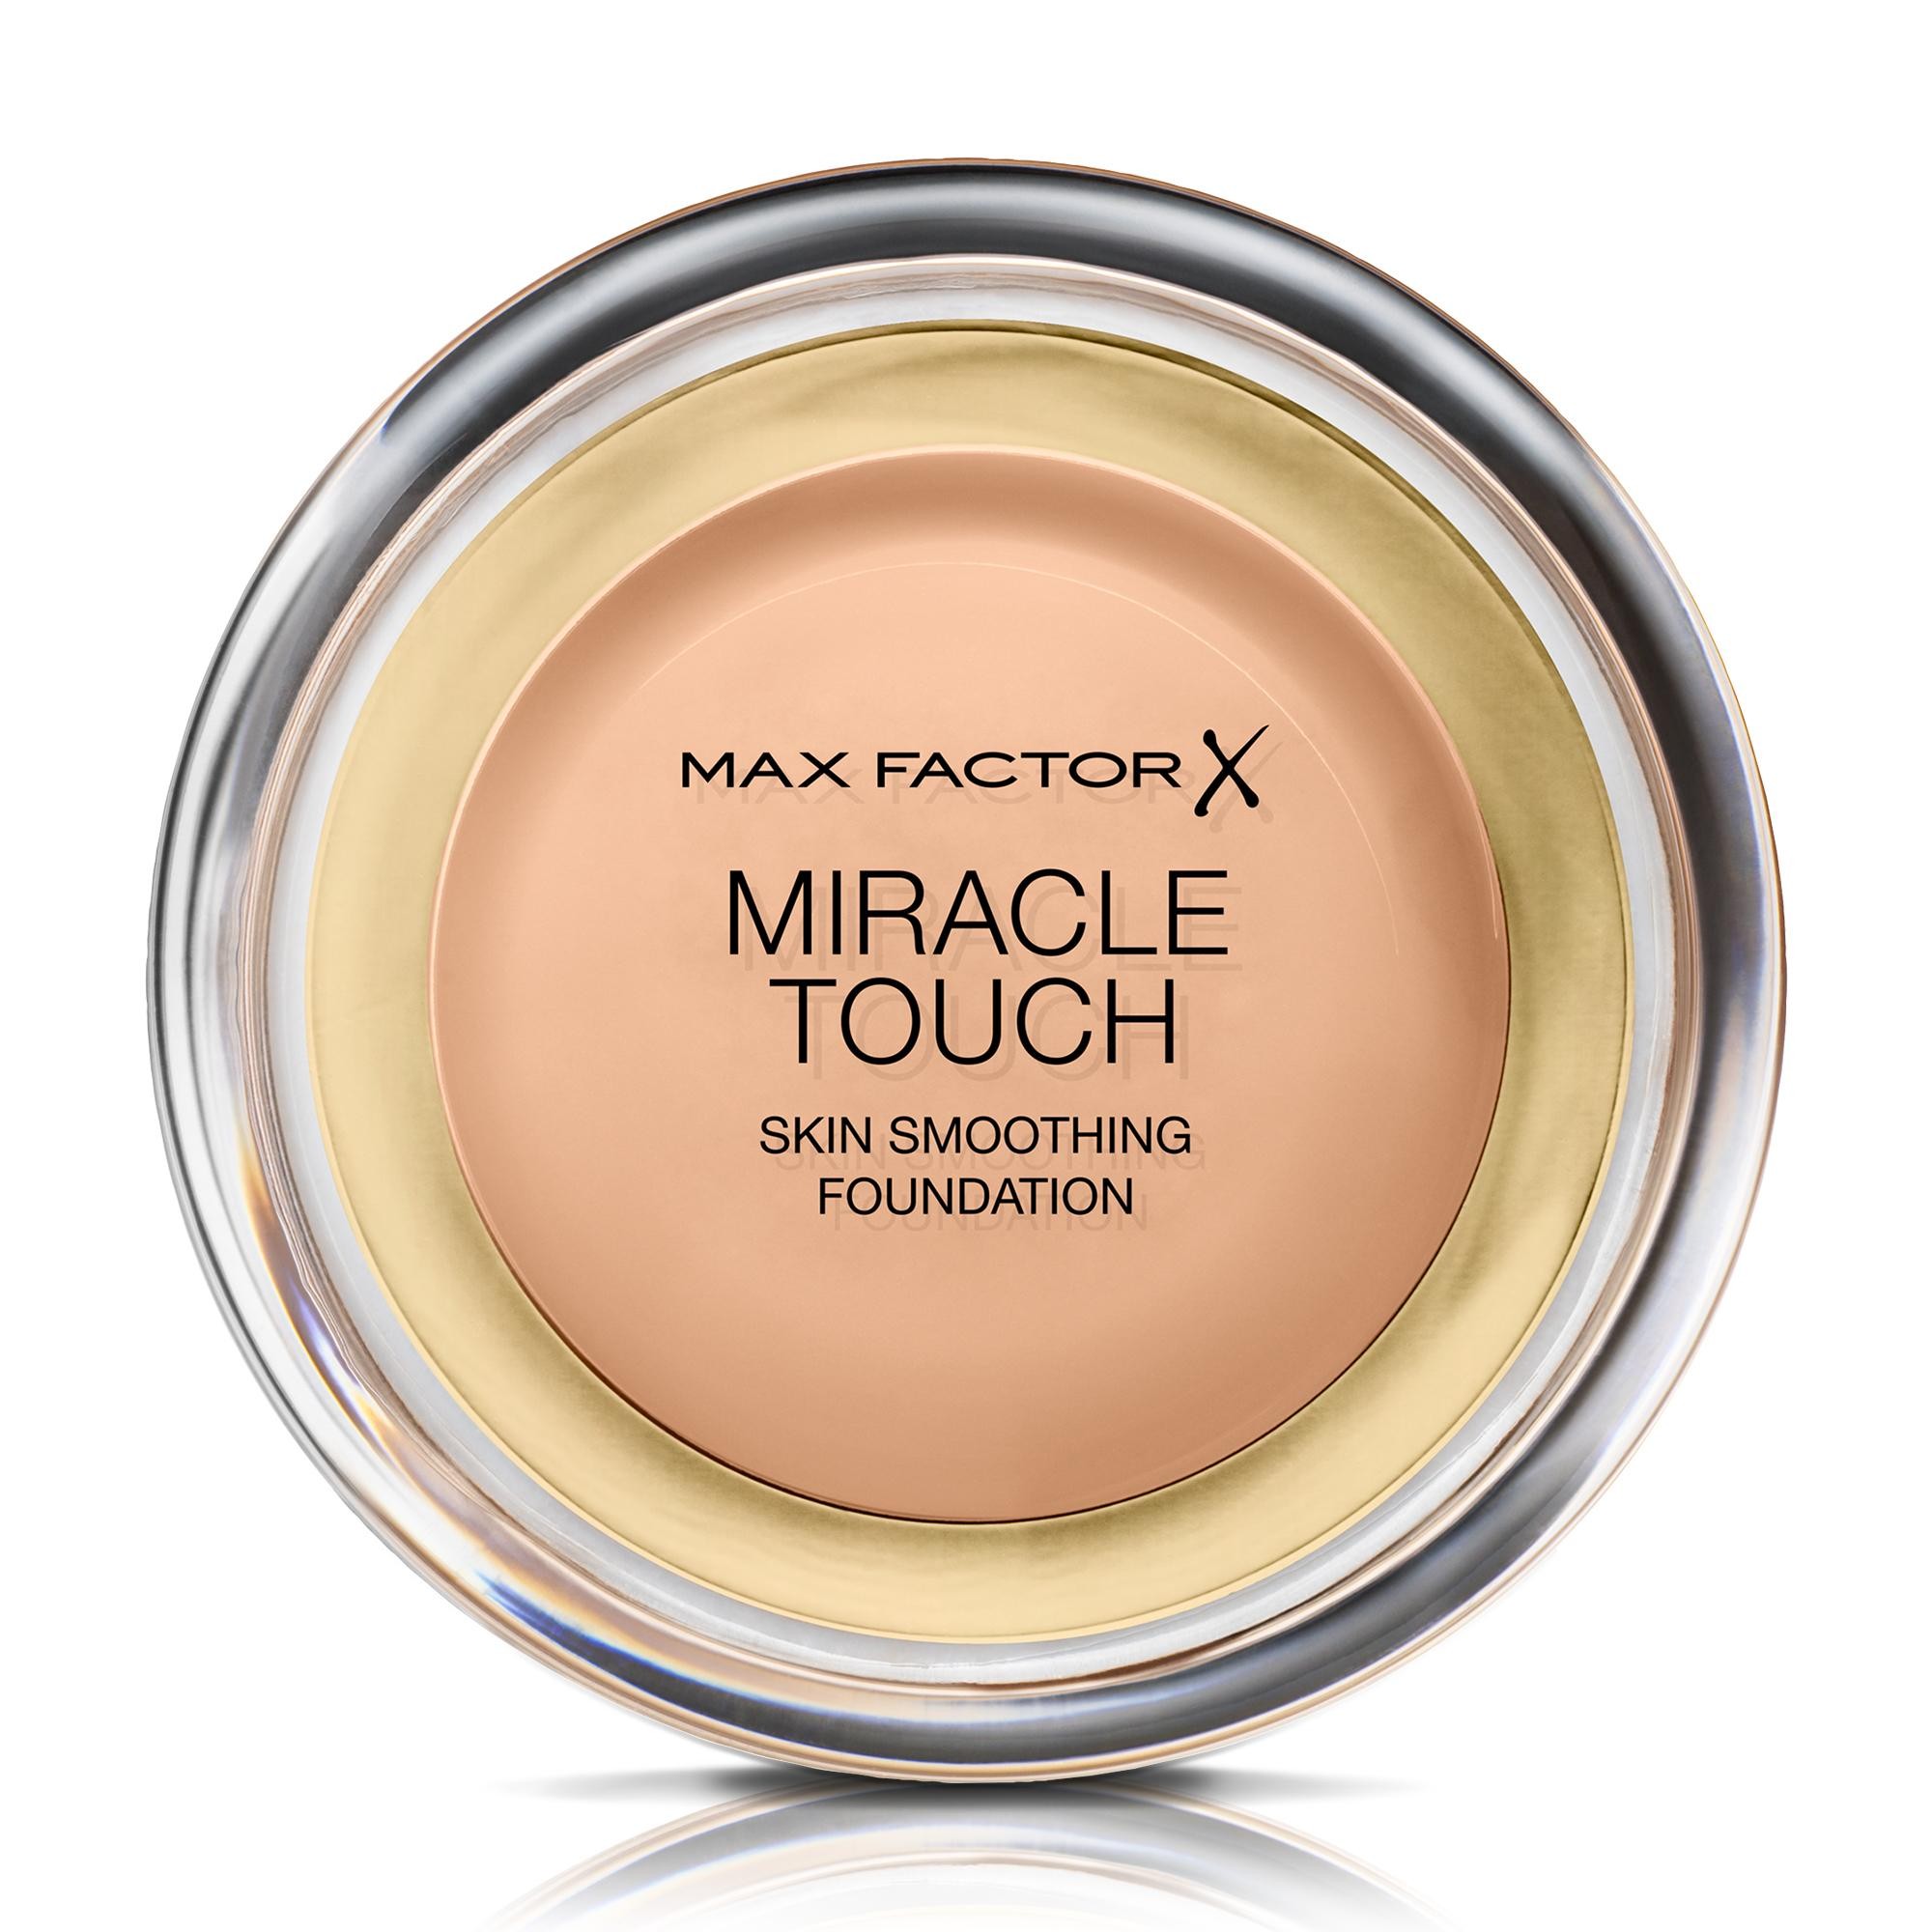 Max Factor Miracle Touch, 045 Warm Almond, 12ml